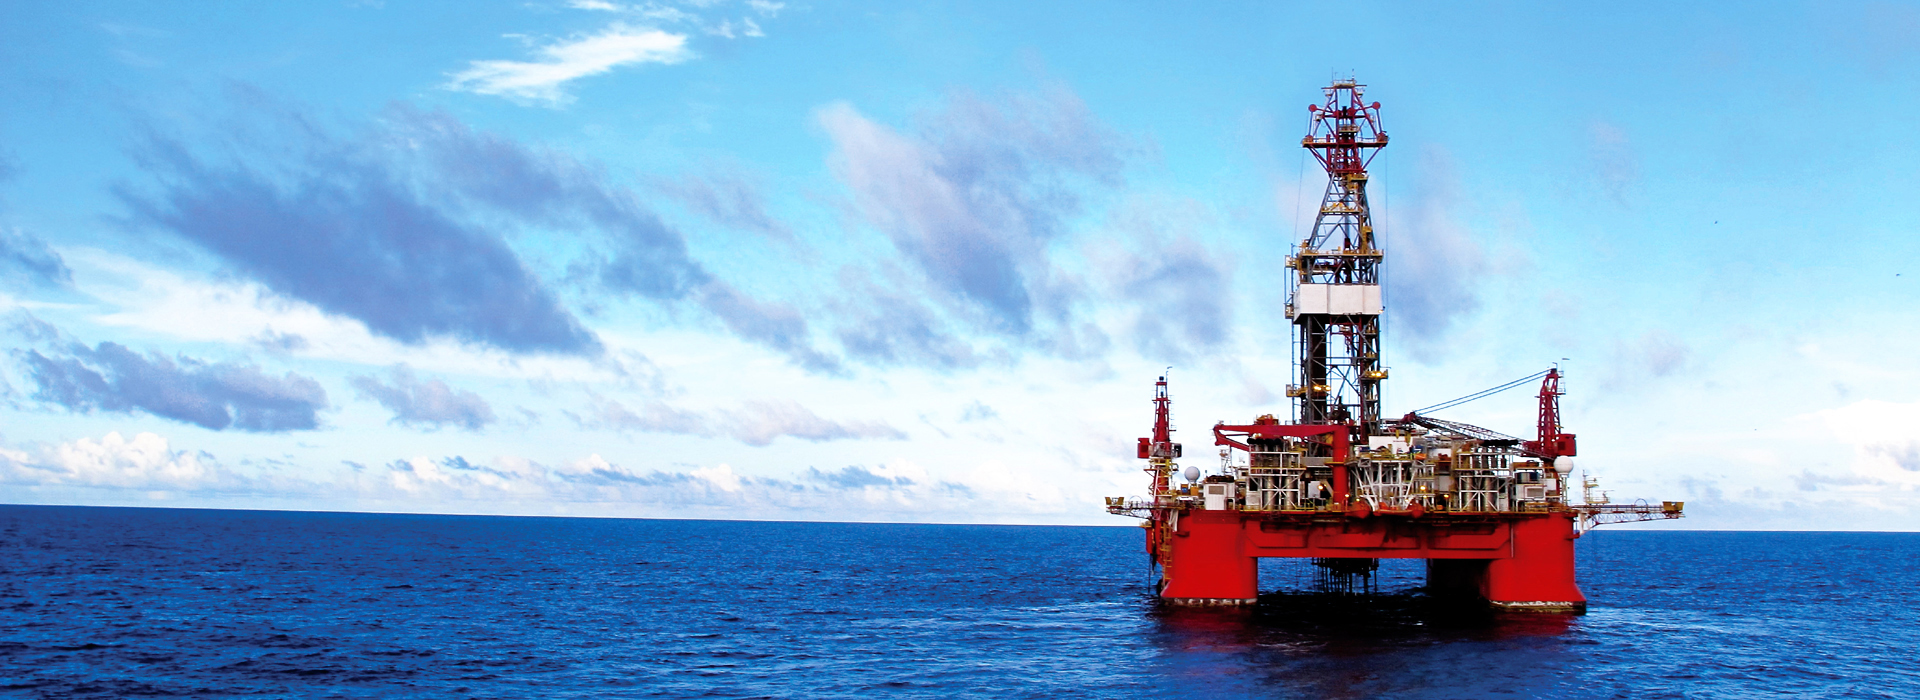 Up to 200Mbps Internet & Voice Communication for Offshore Industry